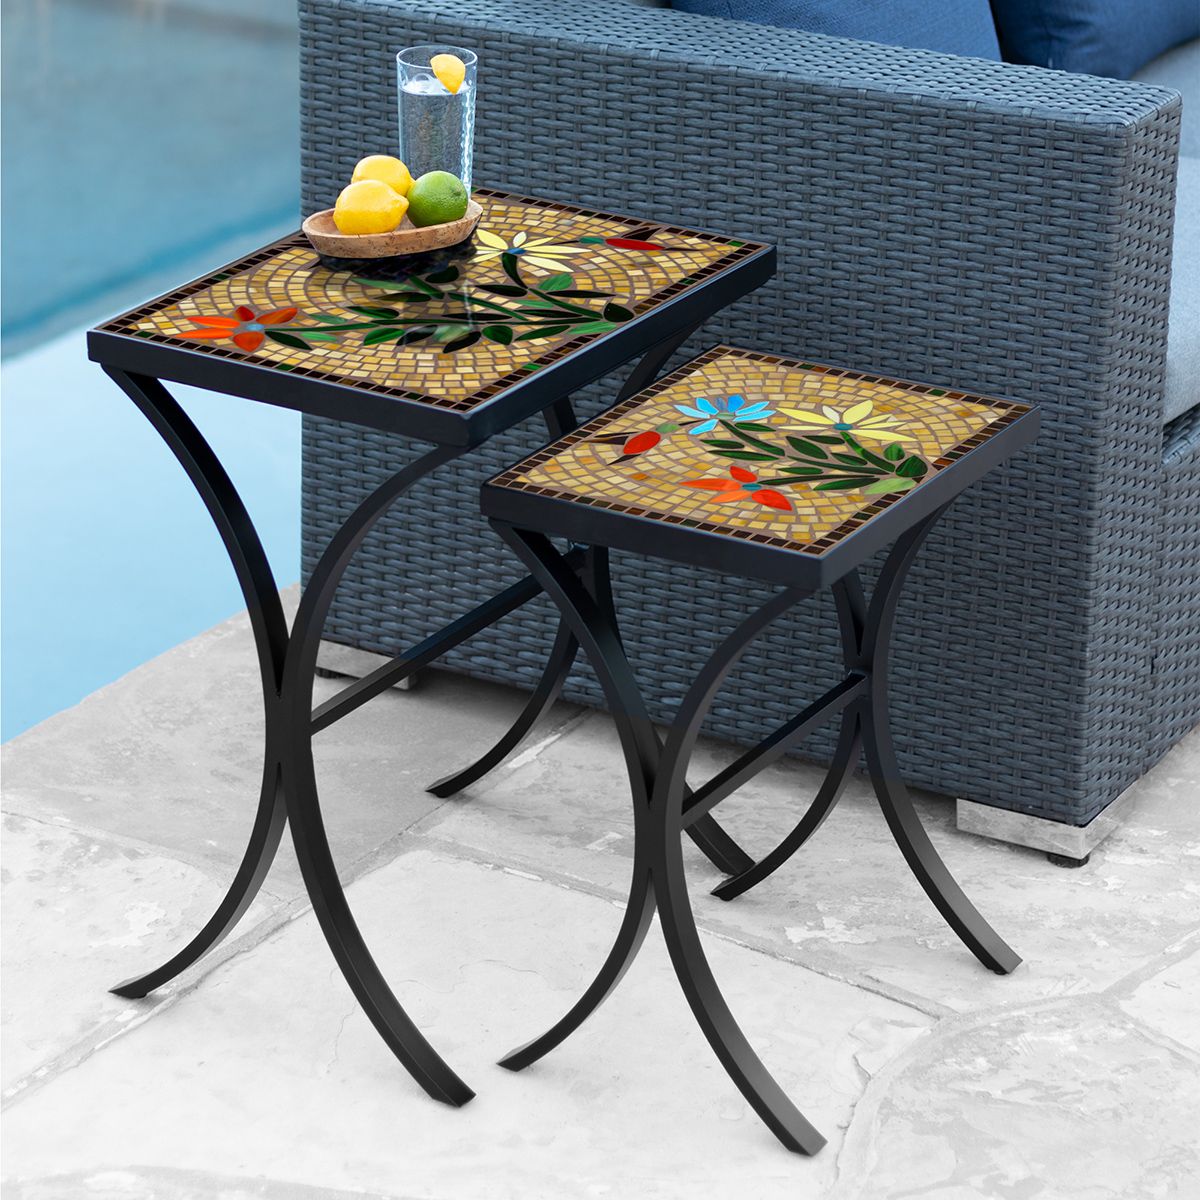 KNF Mosaic Designs - Occasional Tables